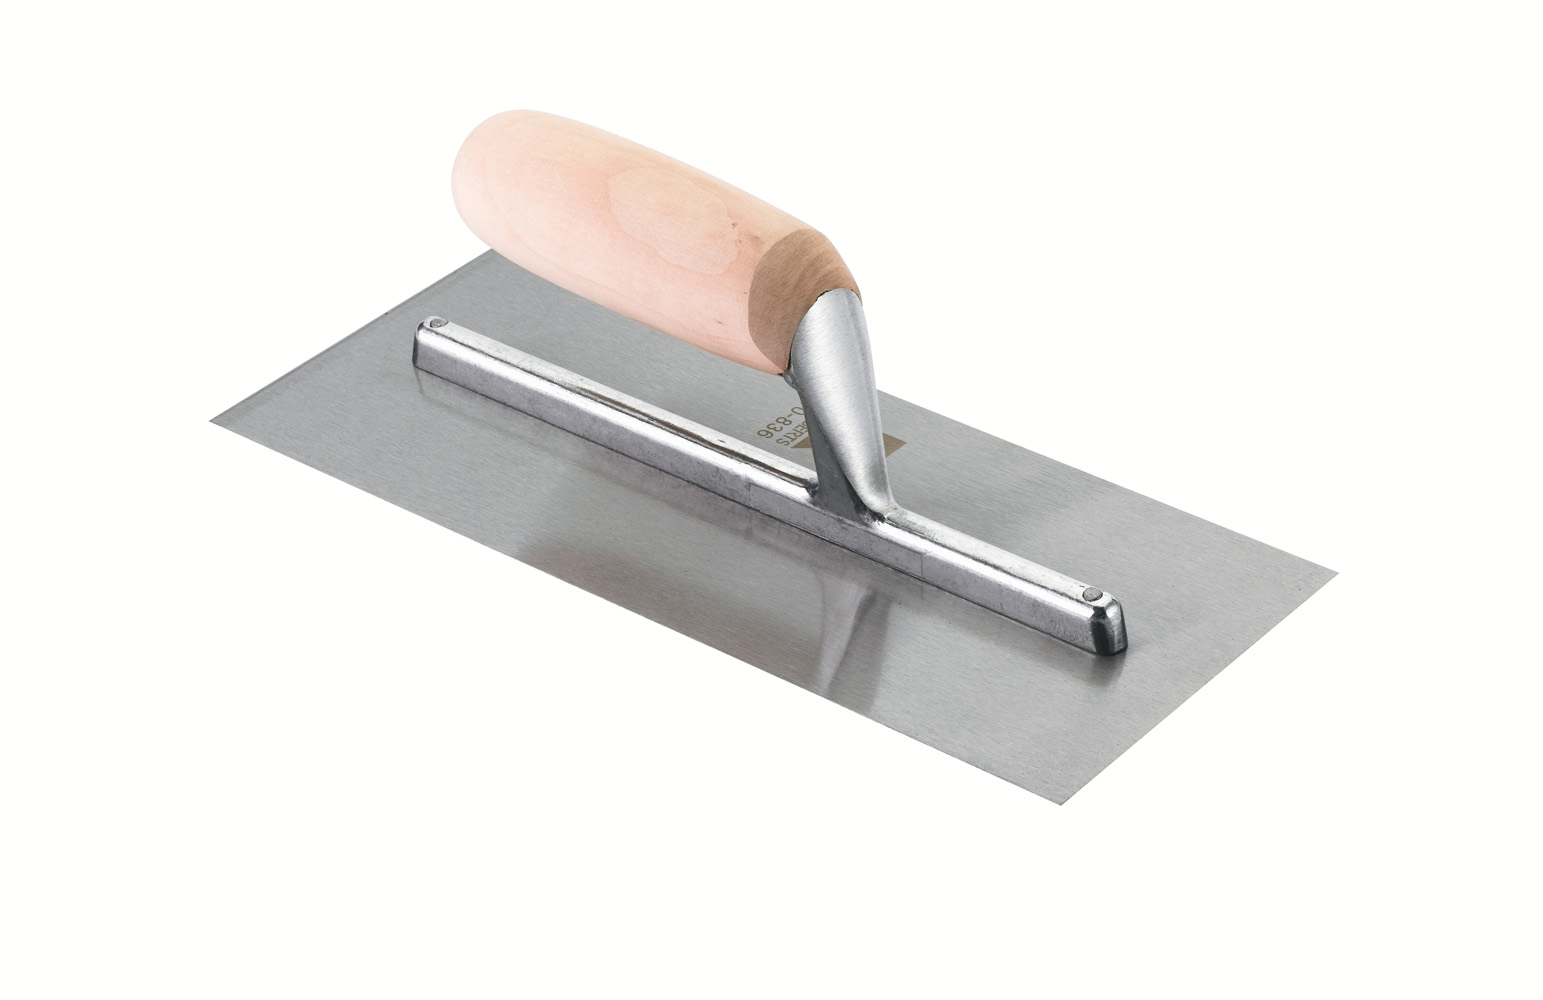 Roberts 11 in. x 4-1/2 in. Finishing and Plastering Trowel with Wood Handle and Polished Steel Blade